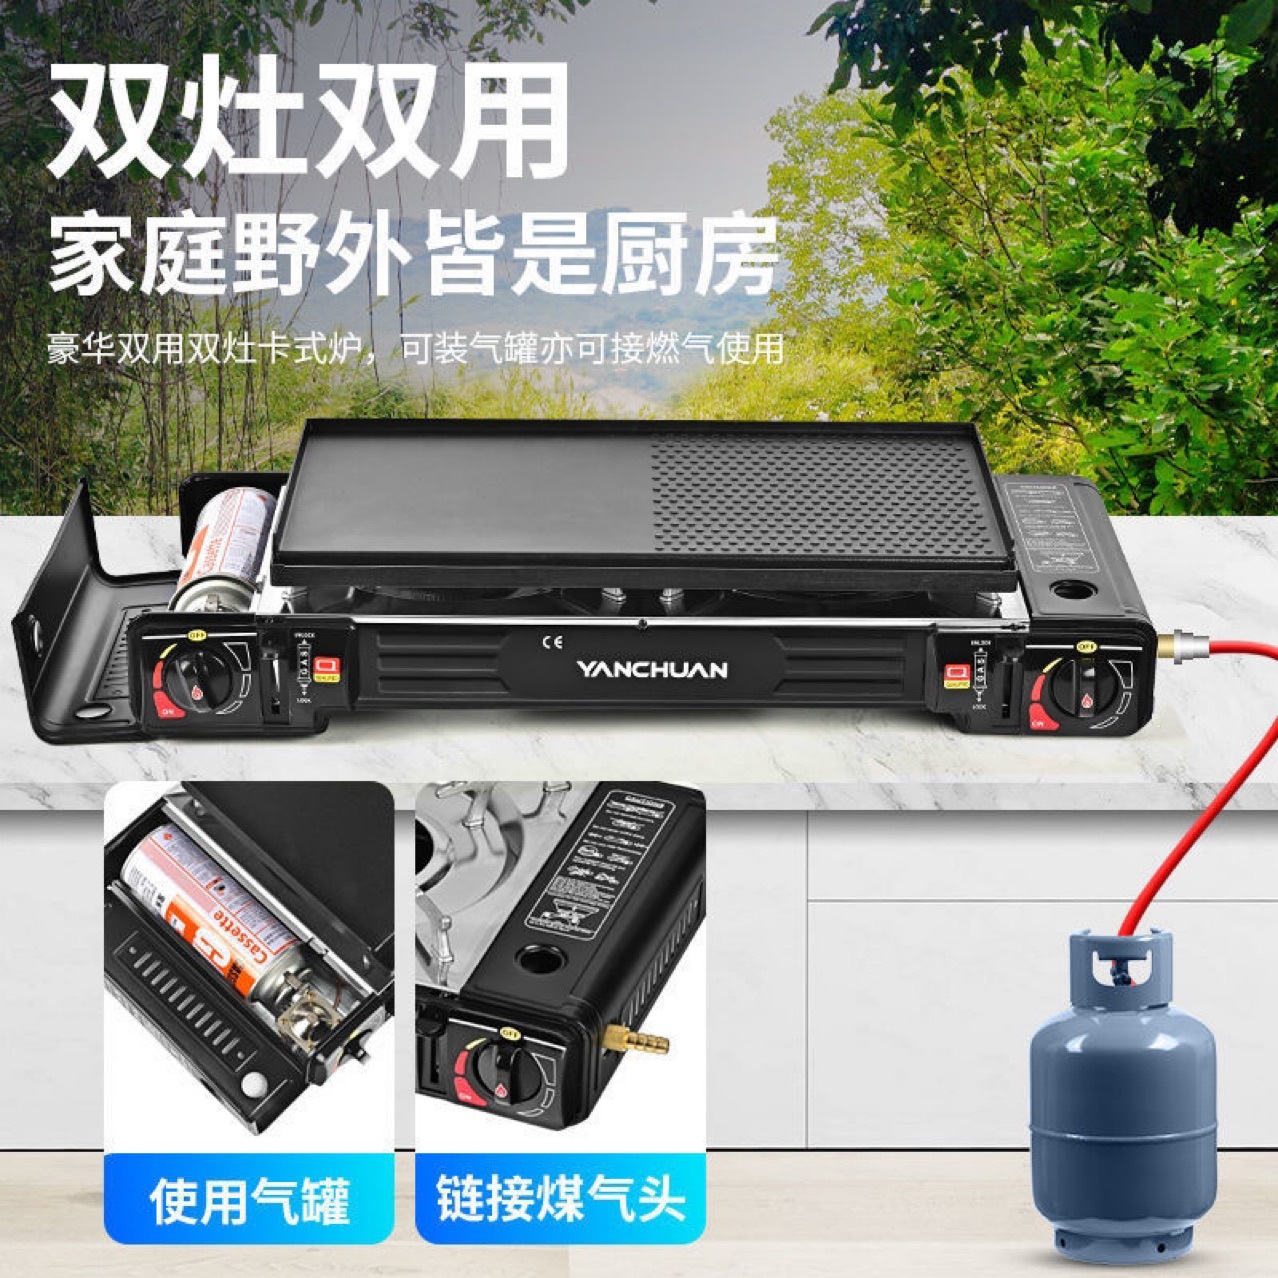 Portable Double-Headed Double-Eye Portable Gas Stove Outdoor Camping Windproof Barbecue Stove Cross-Border Cass Stove Gas Stove Gas Stove